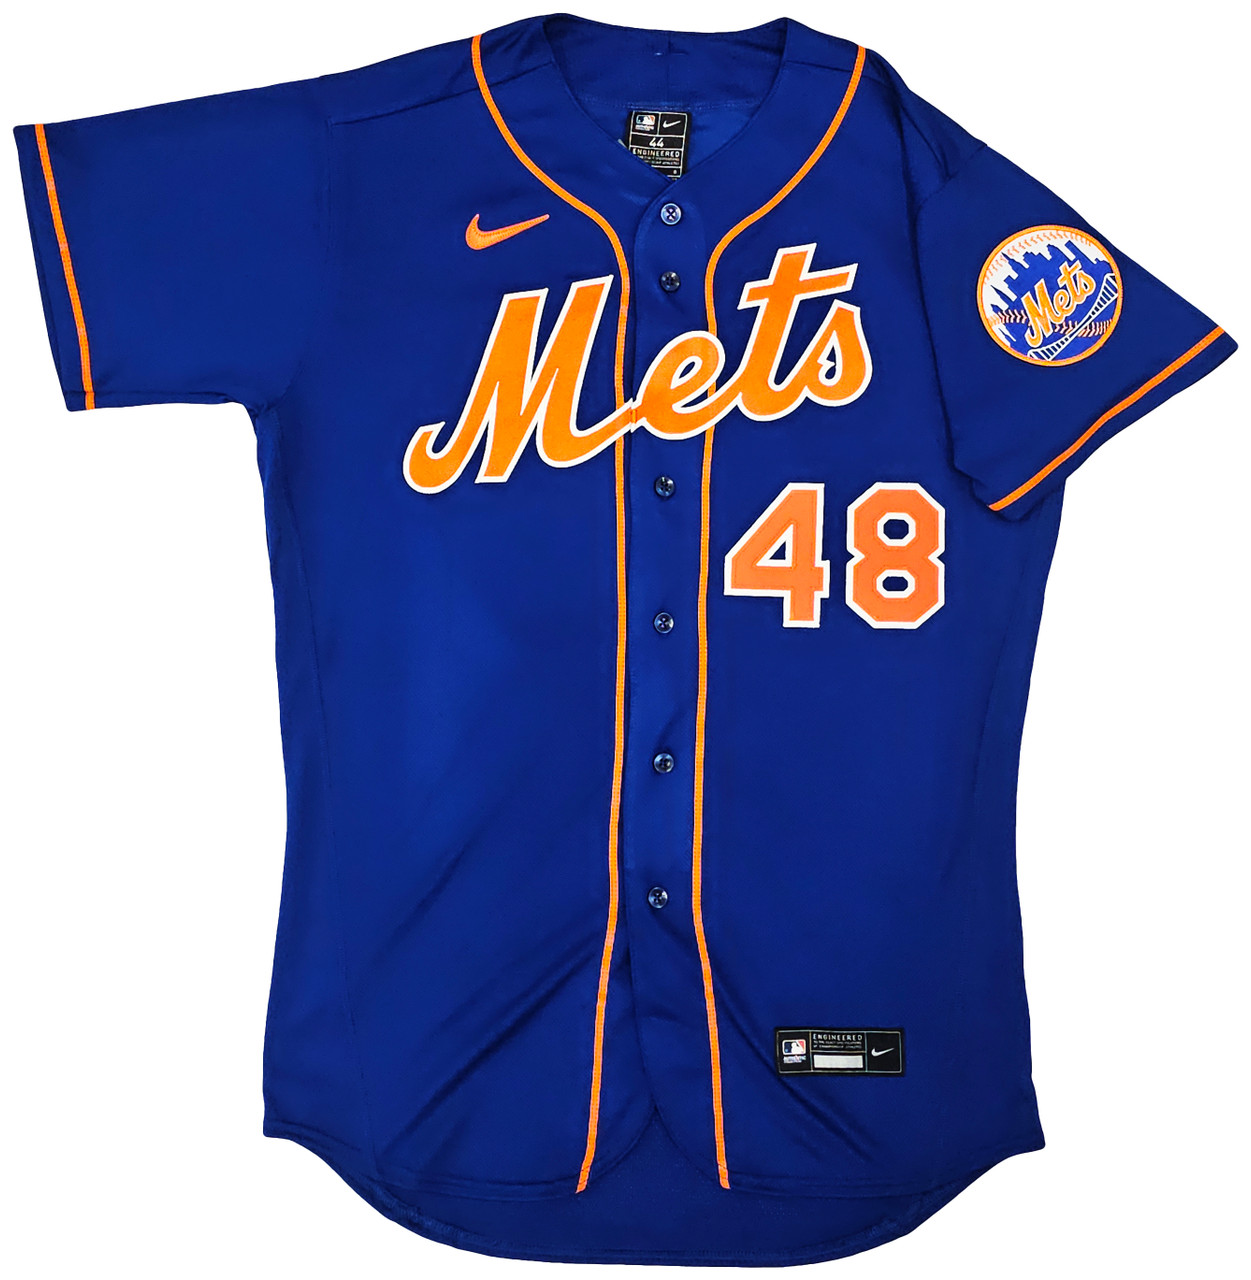 New York Mets Jacob deGrom Autographed Blue Nike Authentic Jersey Size 44  Fanatics Holo Stock #218738 - Mill Creek Sports